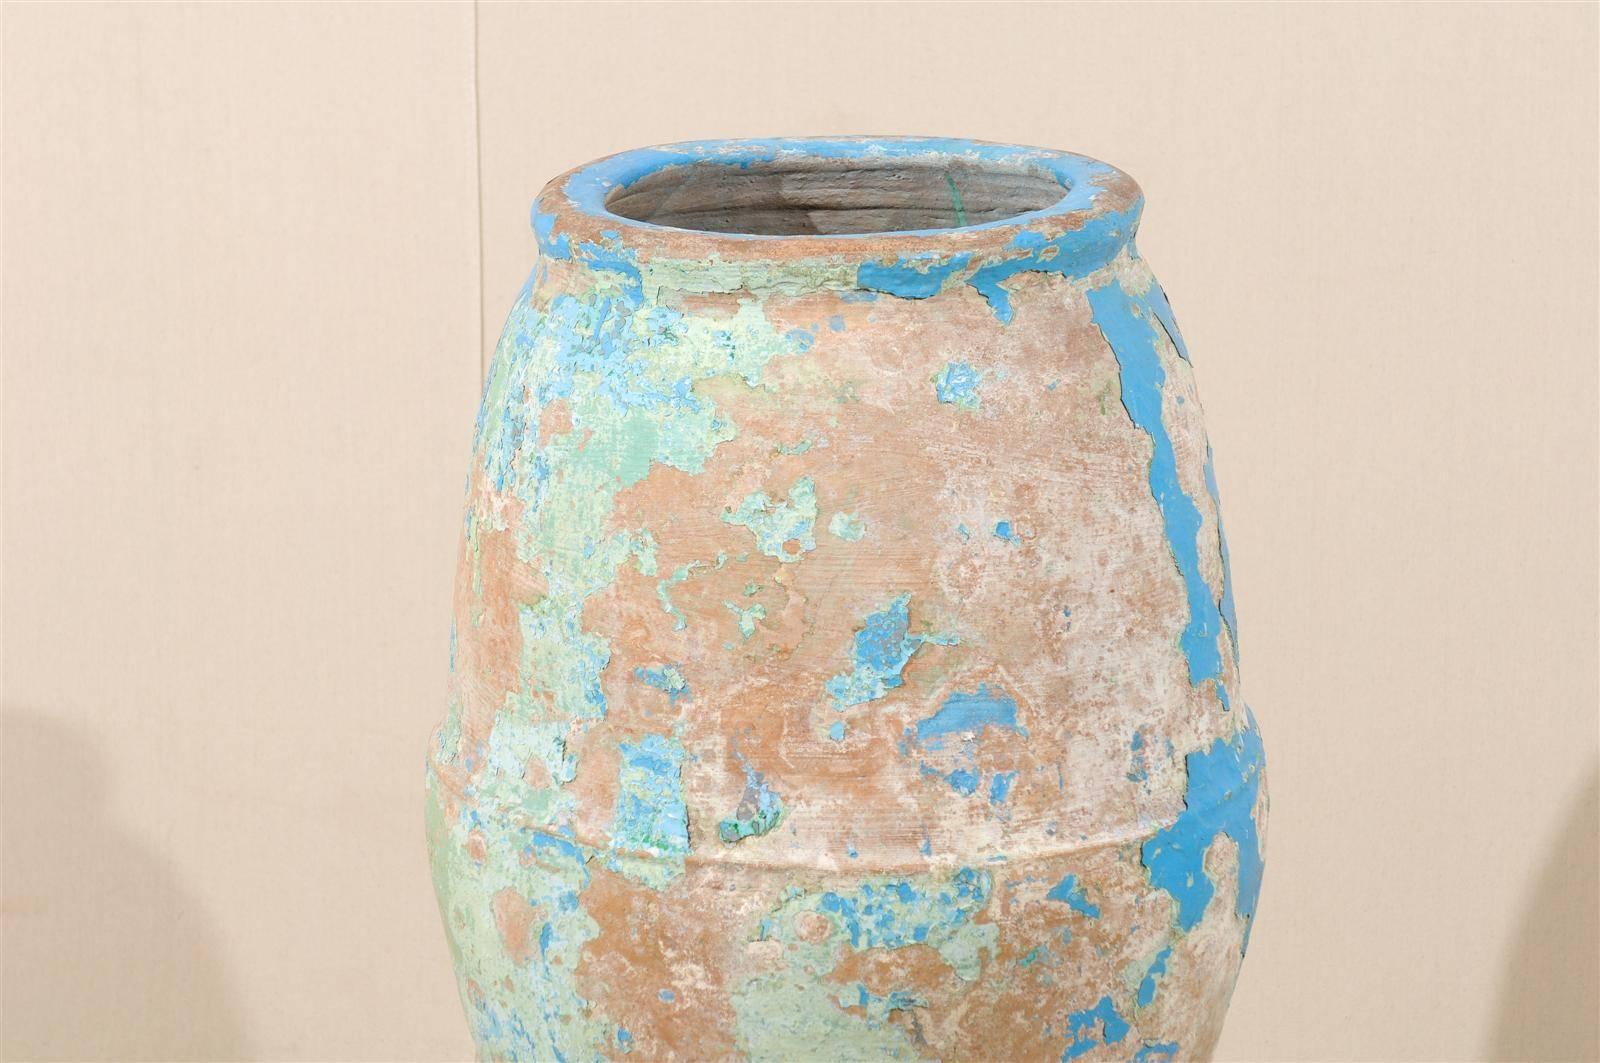 A Spanish olive jar from the mid-19th century. This nicely aged Spanish terracotta olive jar features a wonderful finish with remains of its blue, green and turquoise paint throughout the body. This nicely shaped jar is raised on a custom metal